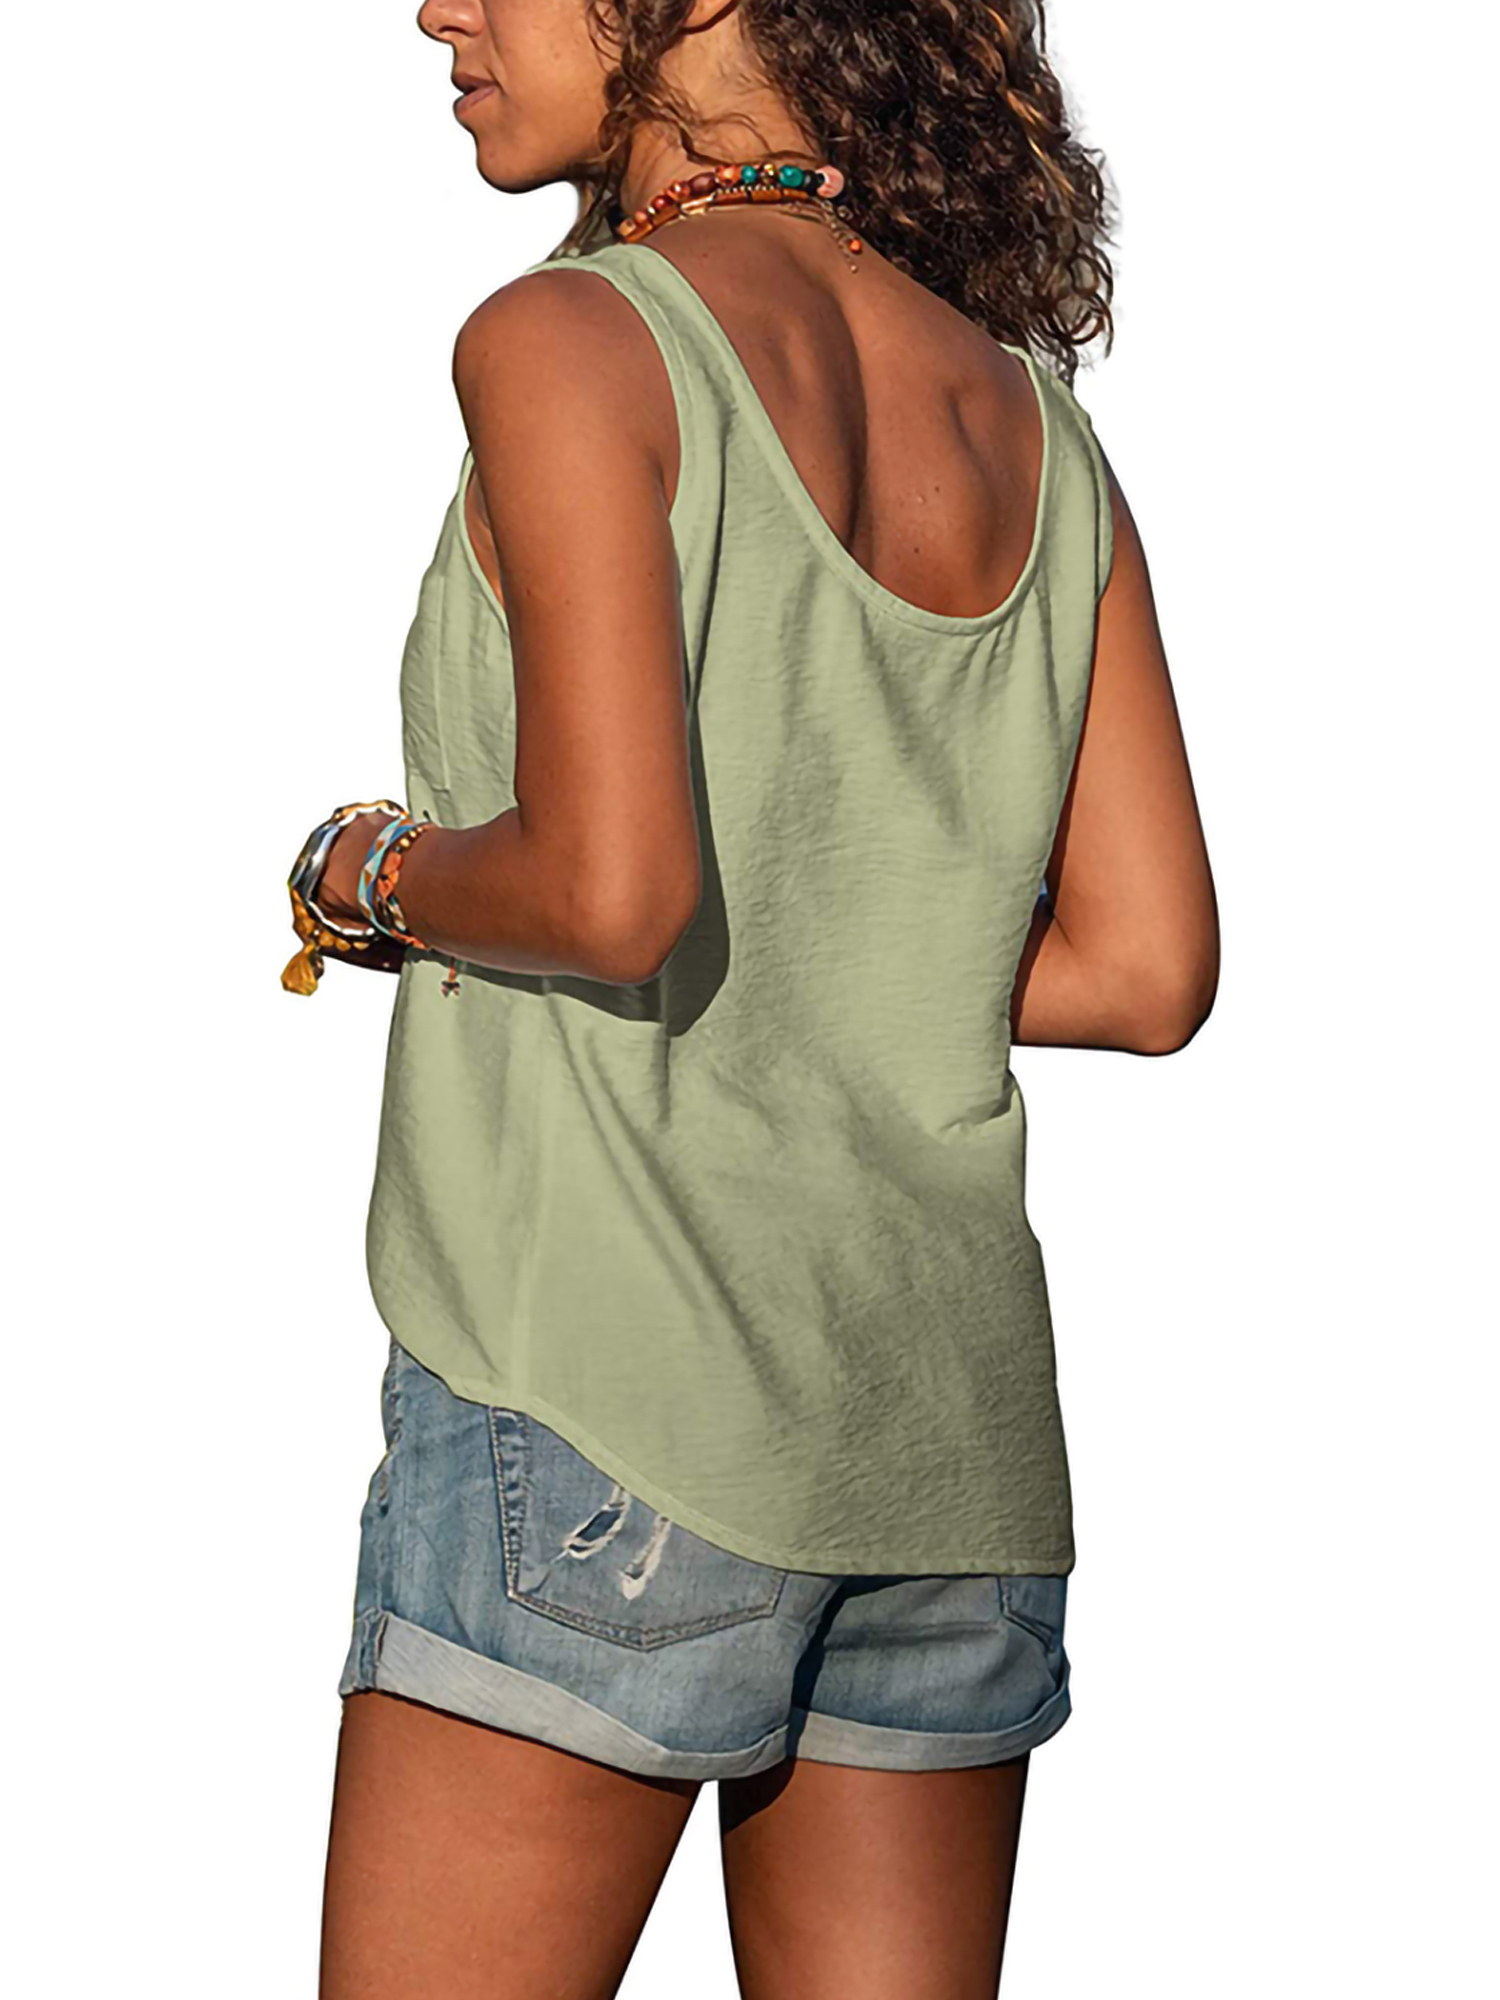 Women Summer Henley Cami Tank Tops Button Down Shirts Workout Casual Chiffon Sleeveless Cami Camisole Tunics Loose Fit Tees Blouse - image 3 of 3